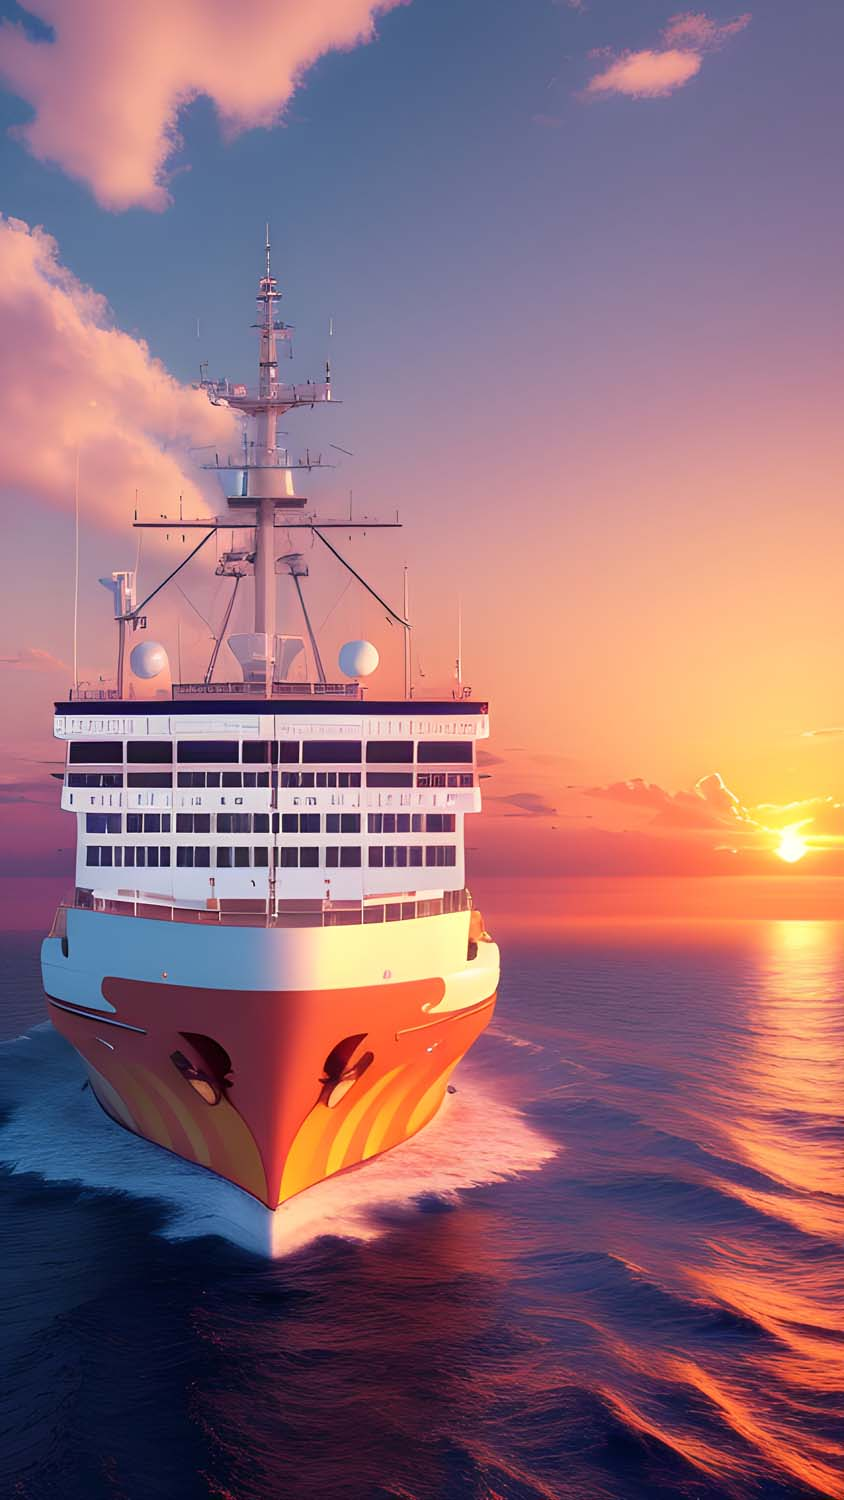 Cruise Background Images HD Pictures and Wallpaper For Free Download   Pngtree